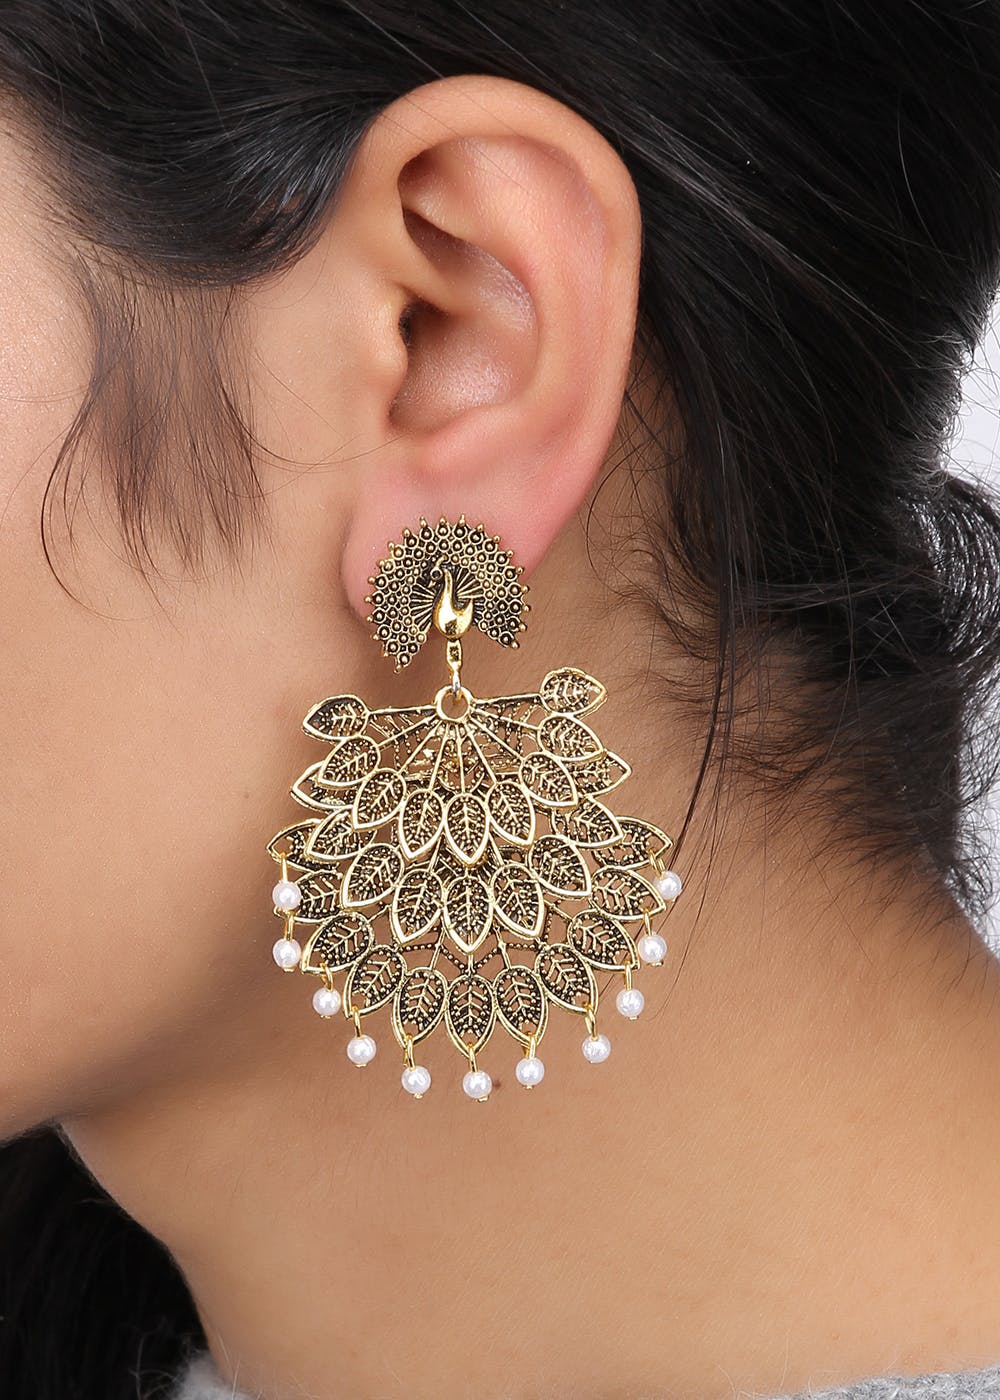 Discover 69+ peacock earrings images